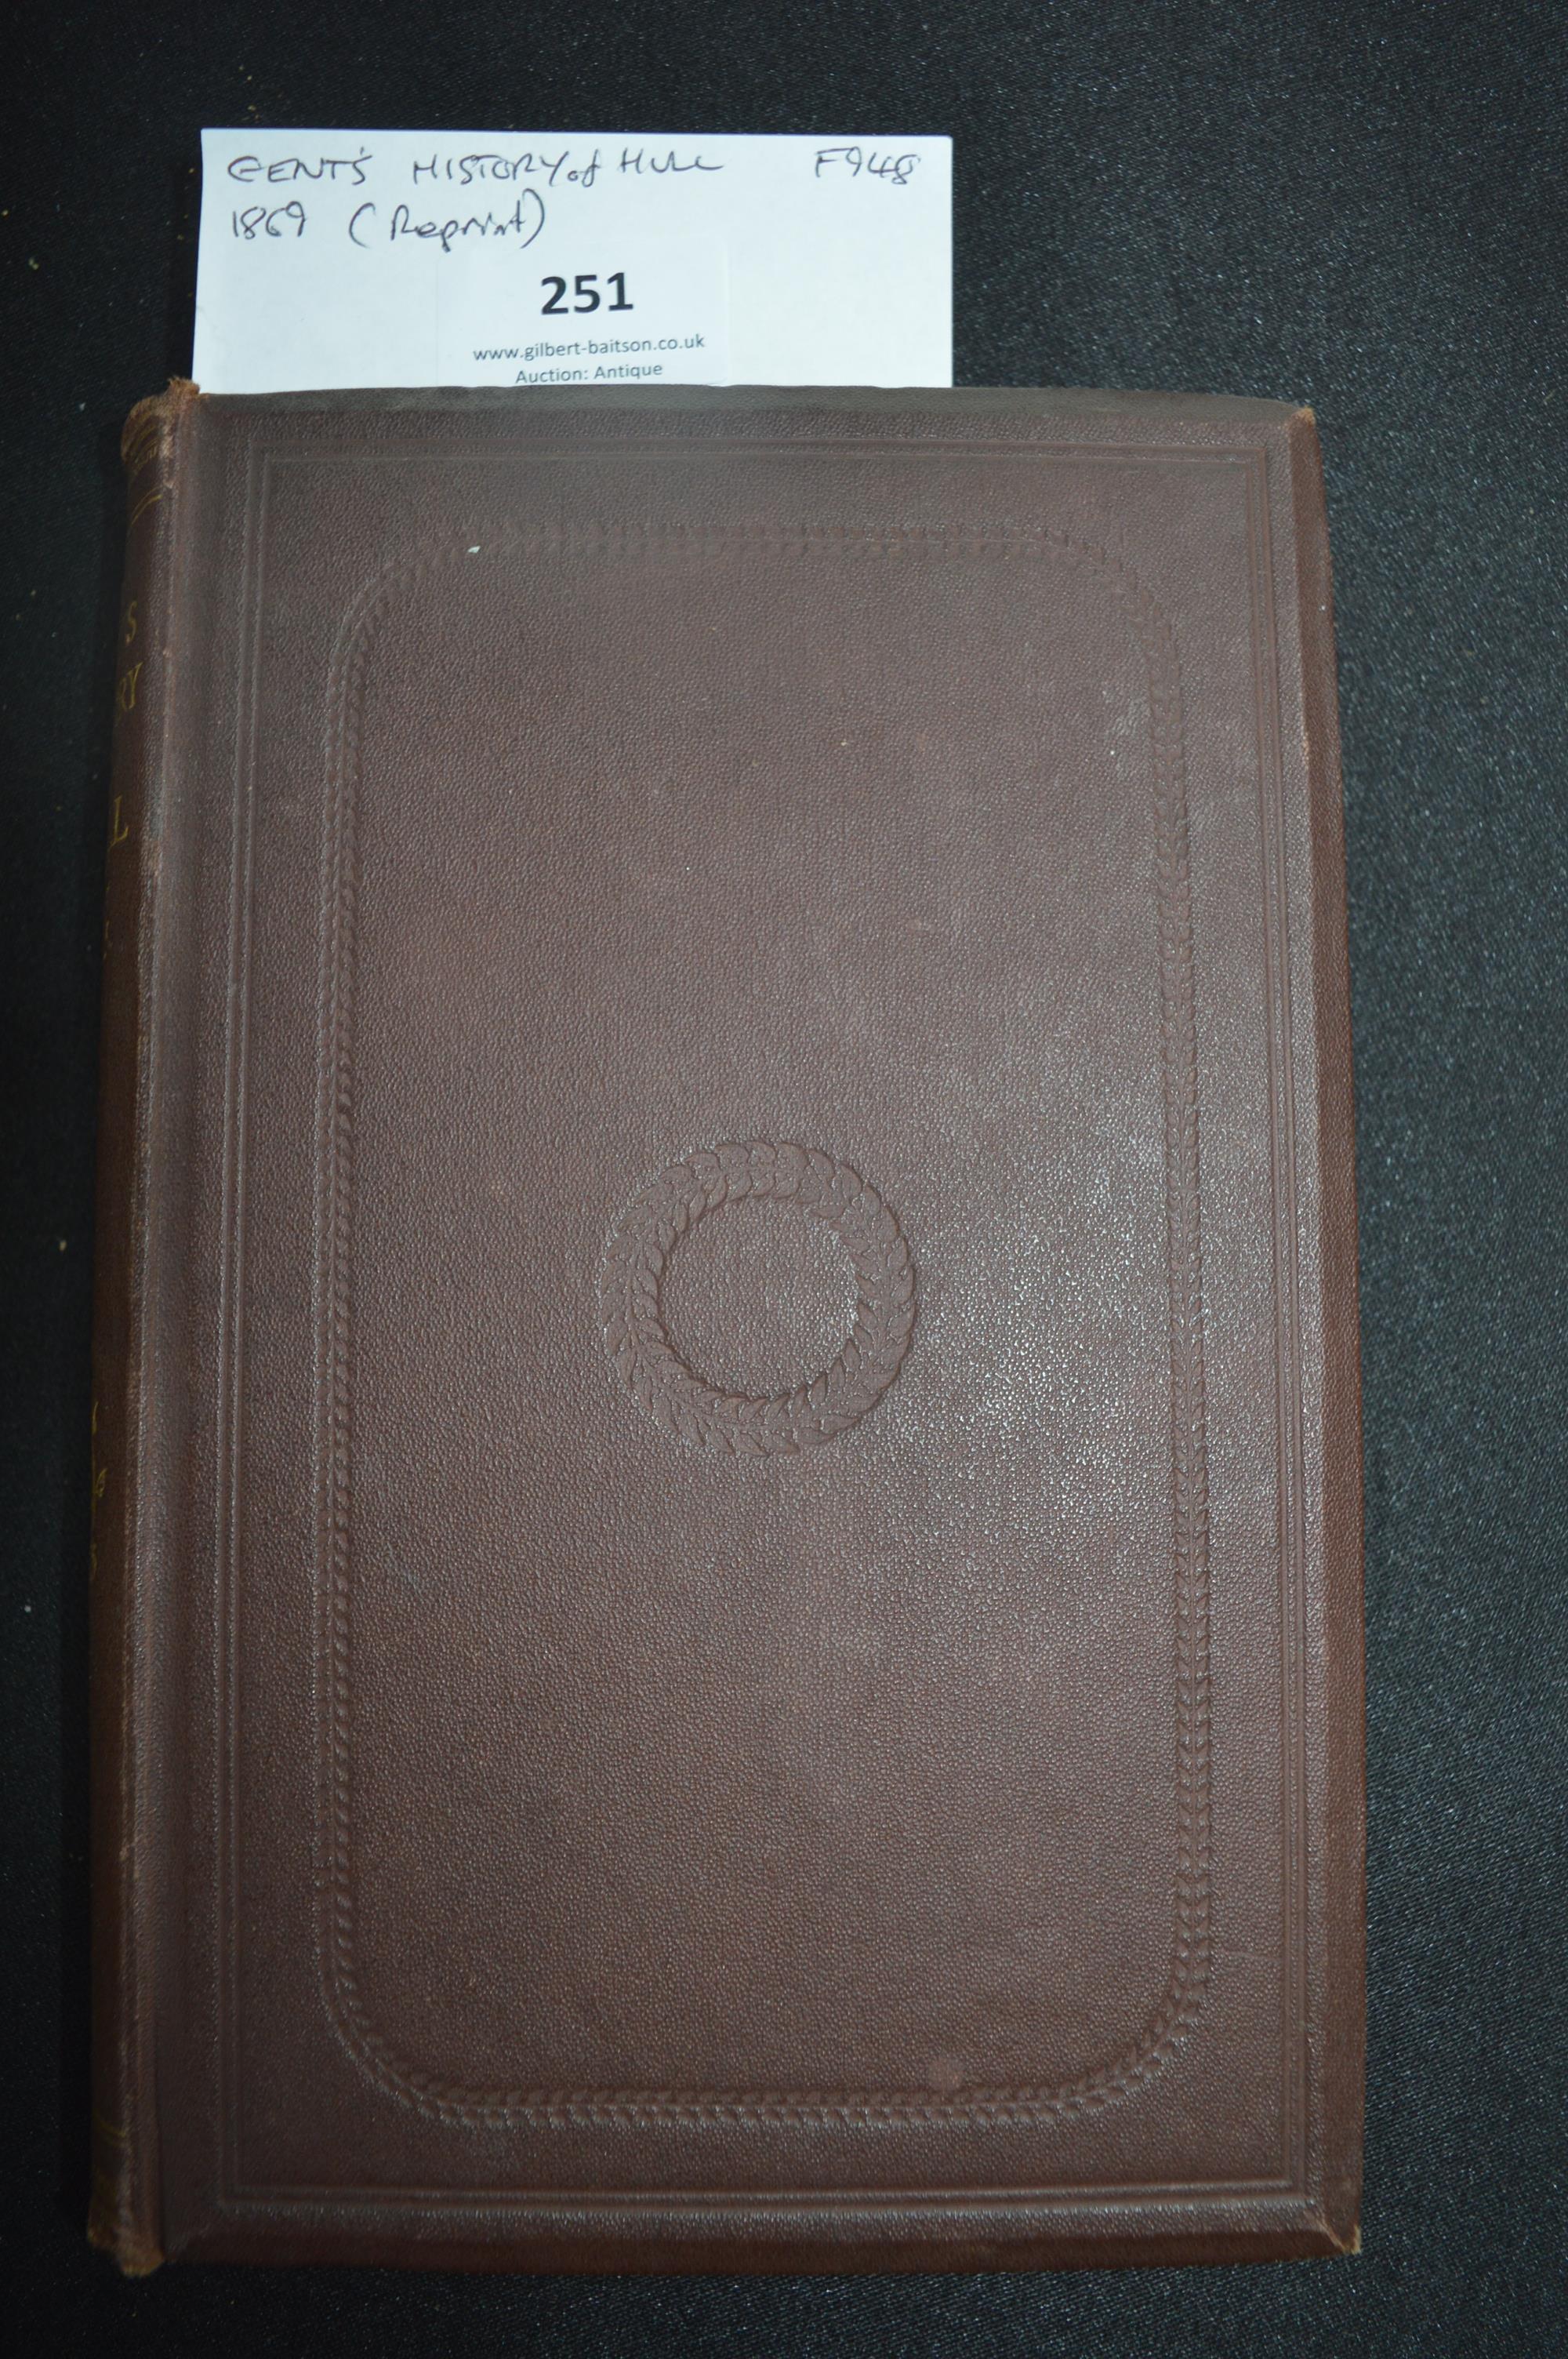 Gent's History of Hull 1869 Edition